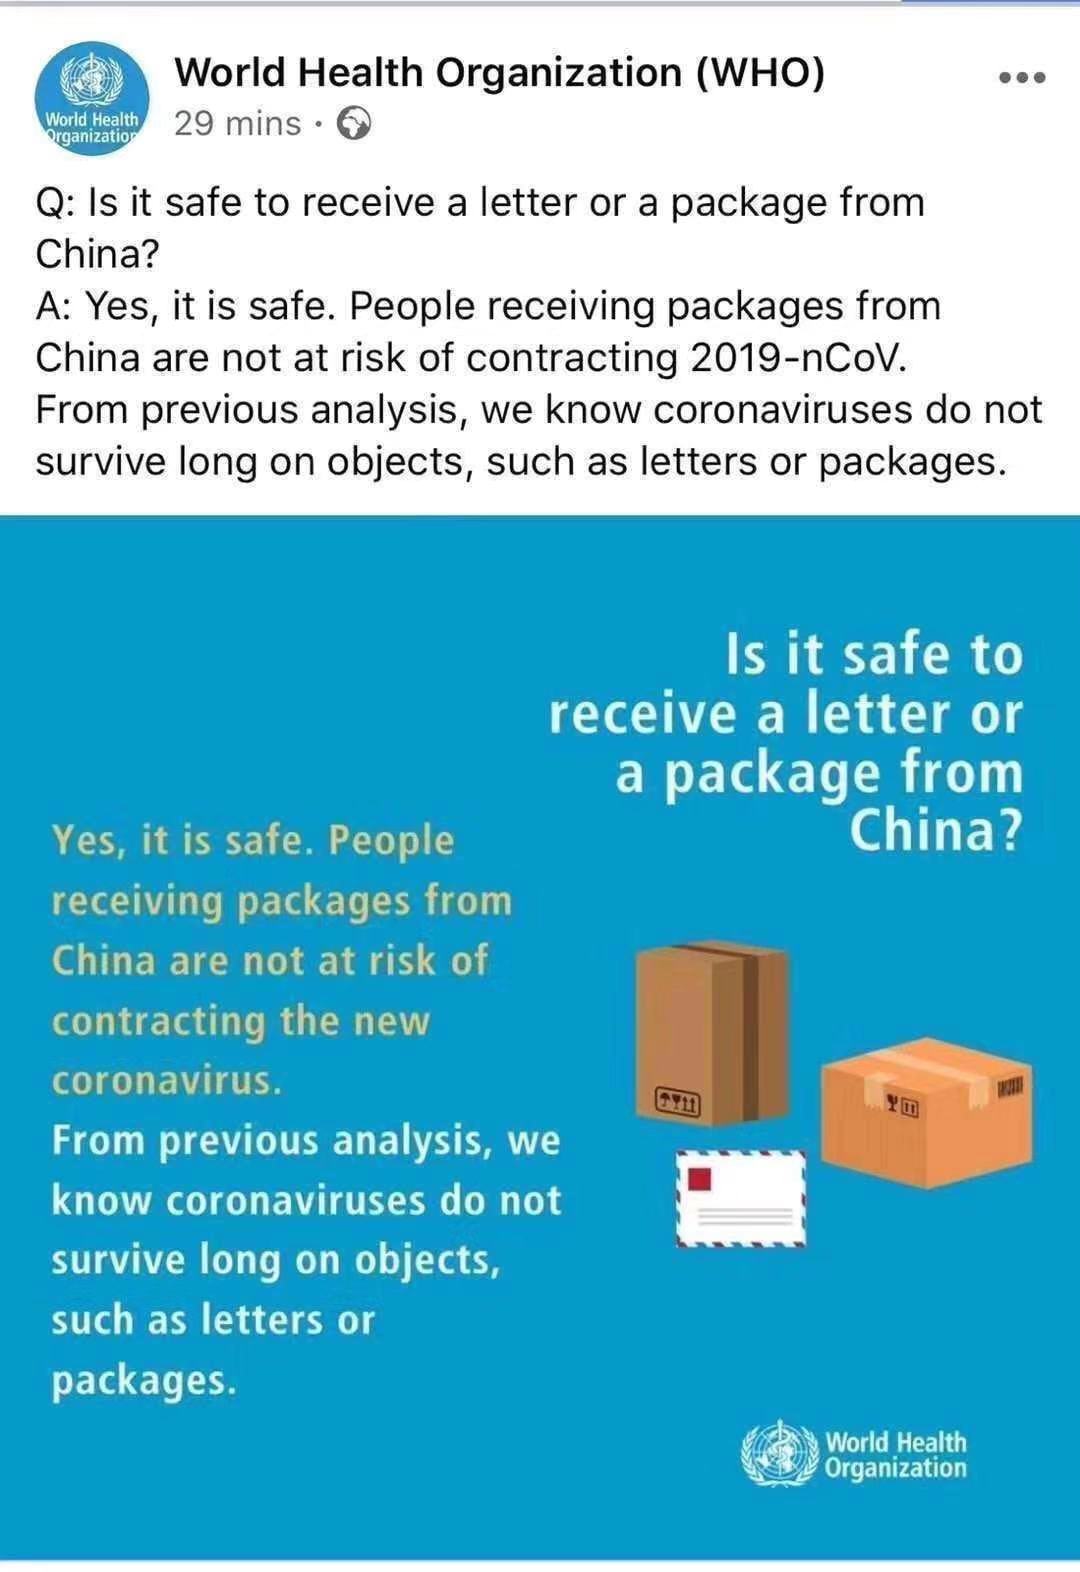 Is it safe to receive a letter or a package from China?